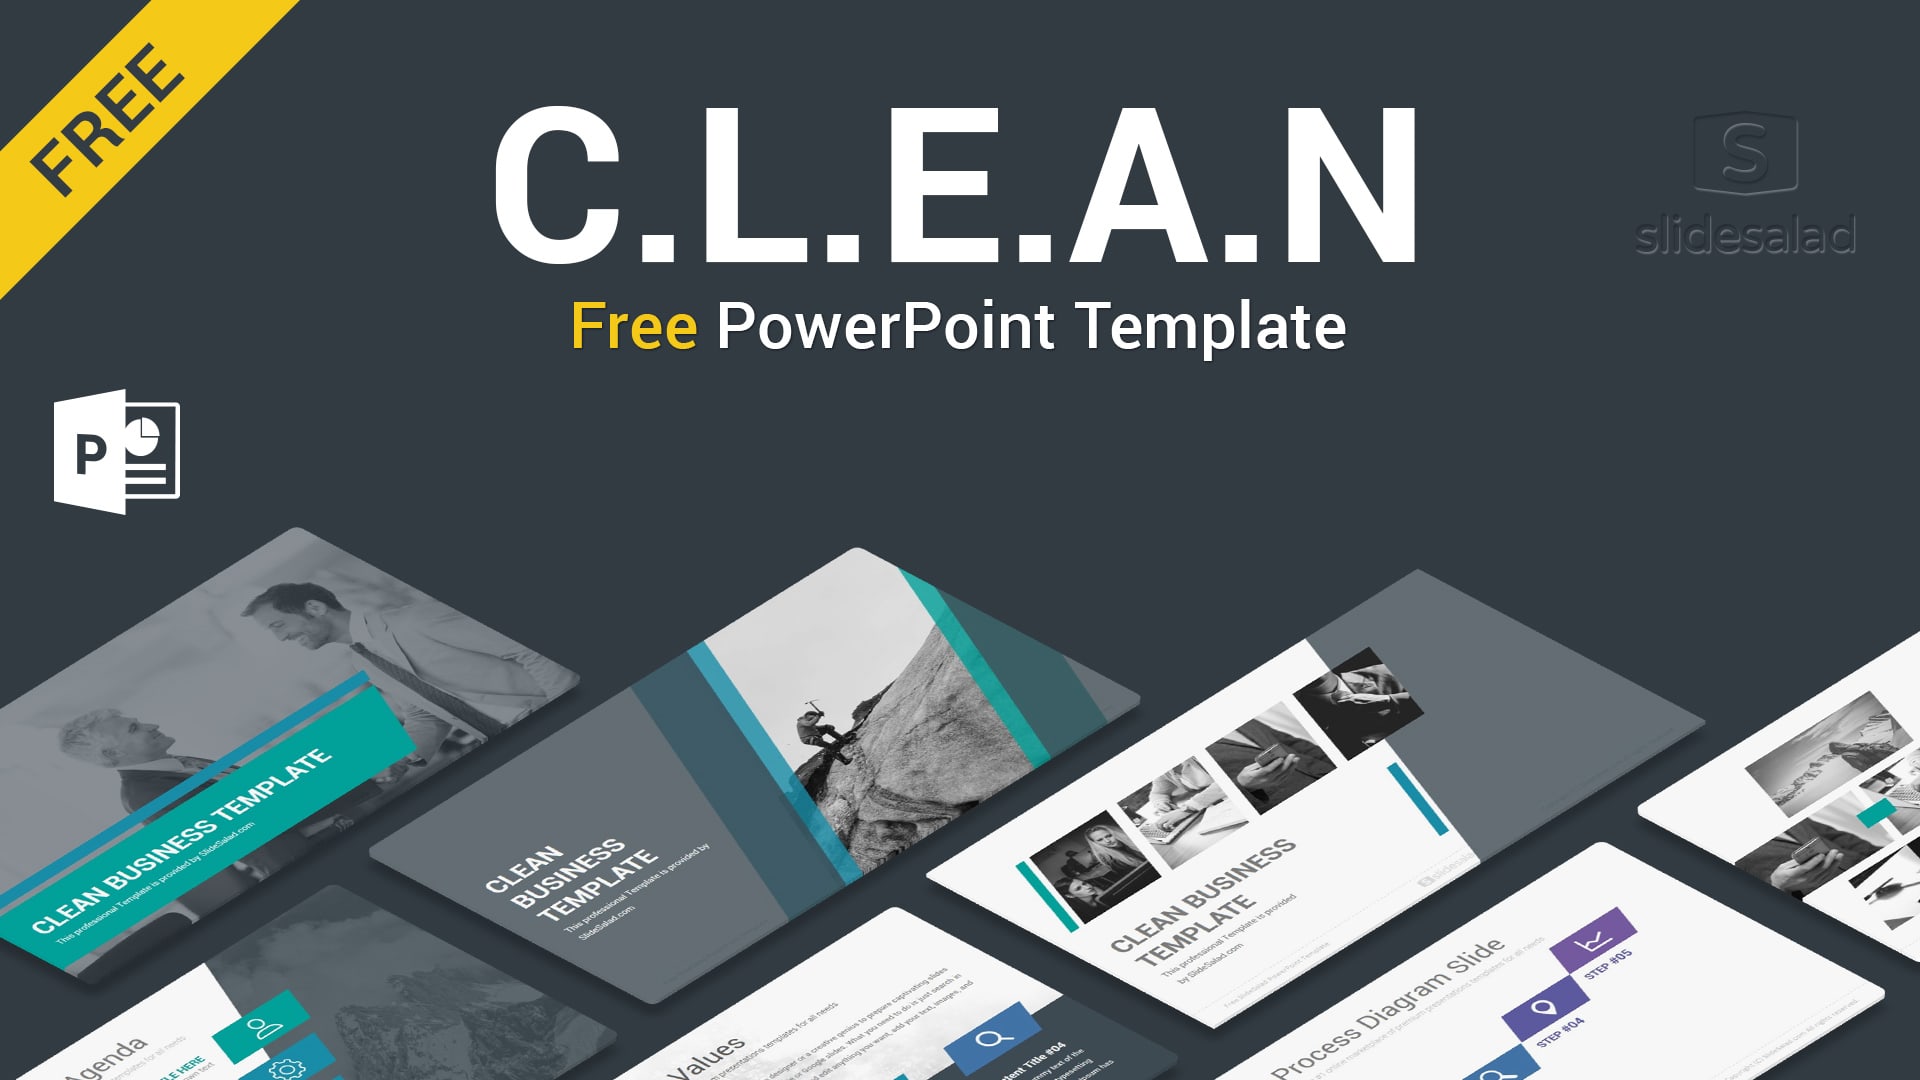 Clean Free PowerPoint Template - Free Download Throughout Free Download Powerpoint Templates For Business Presentation